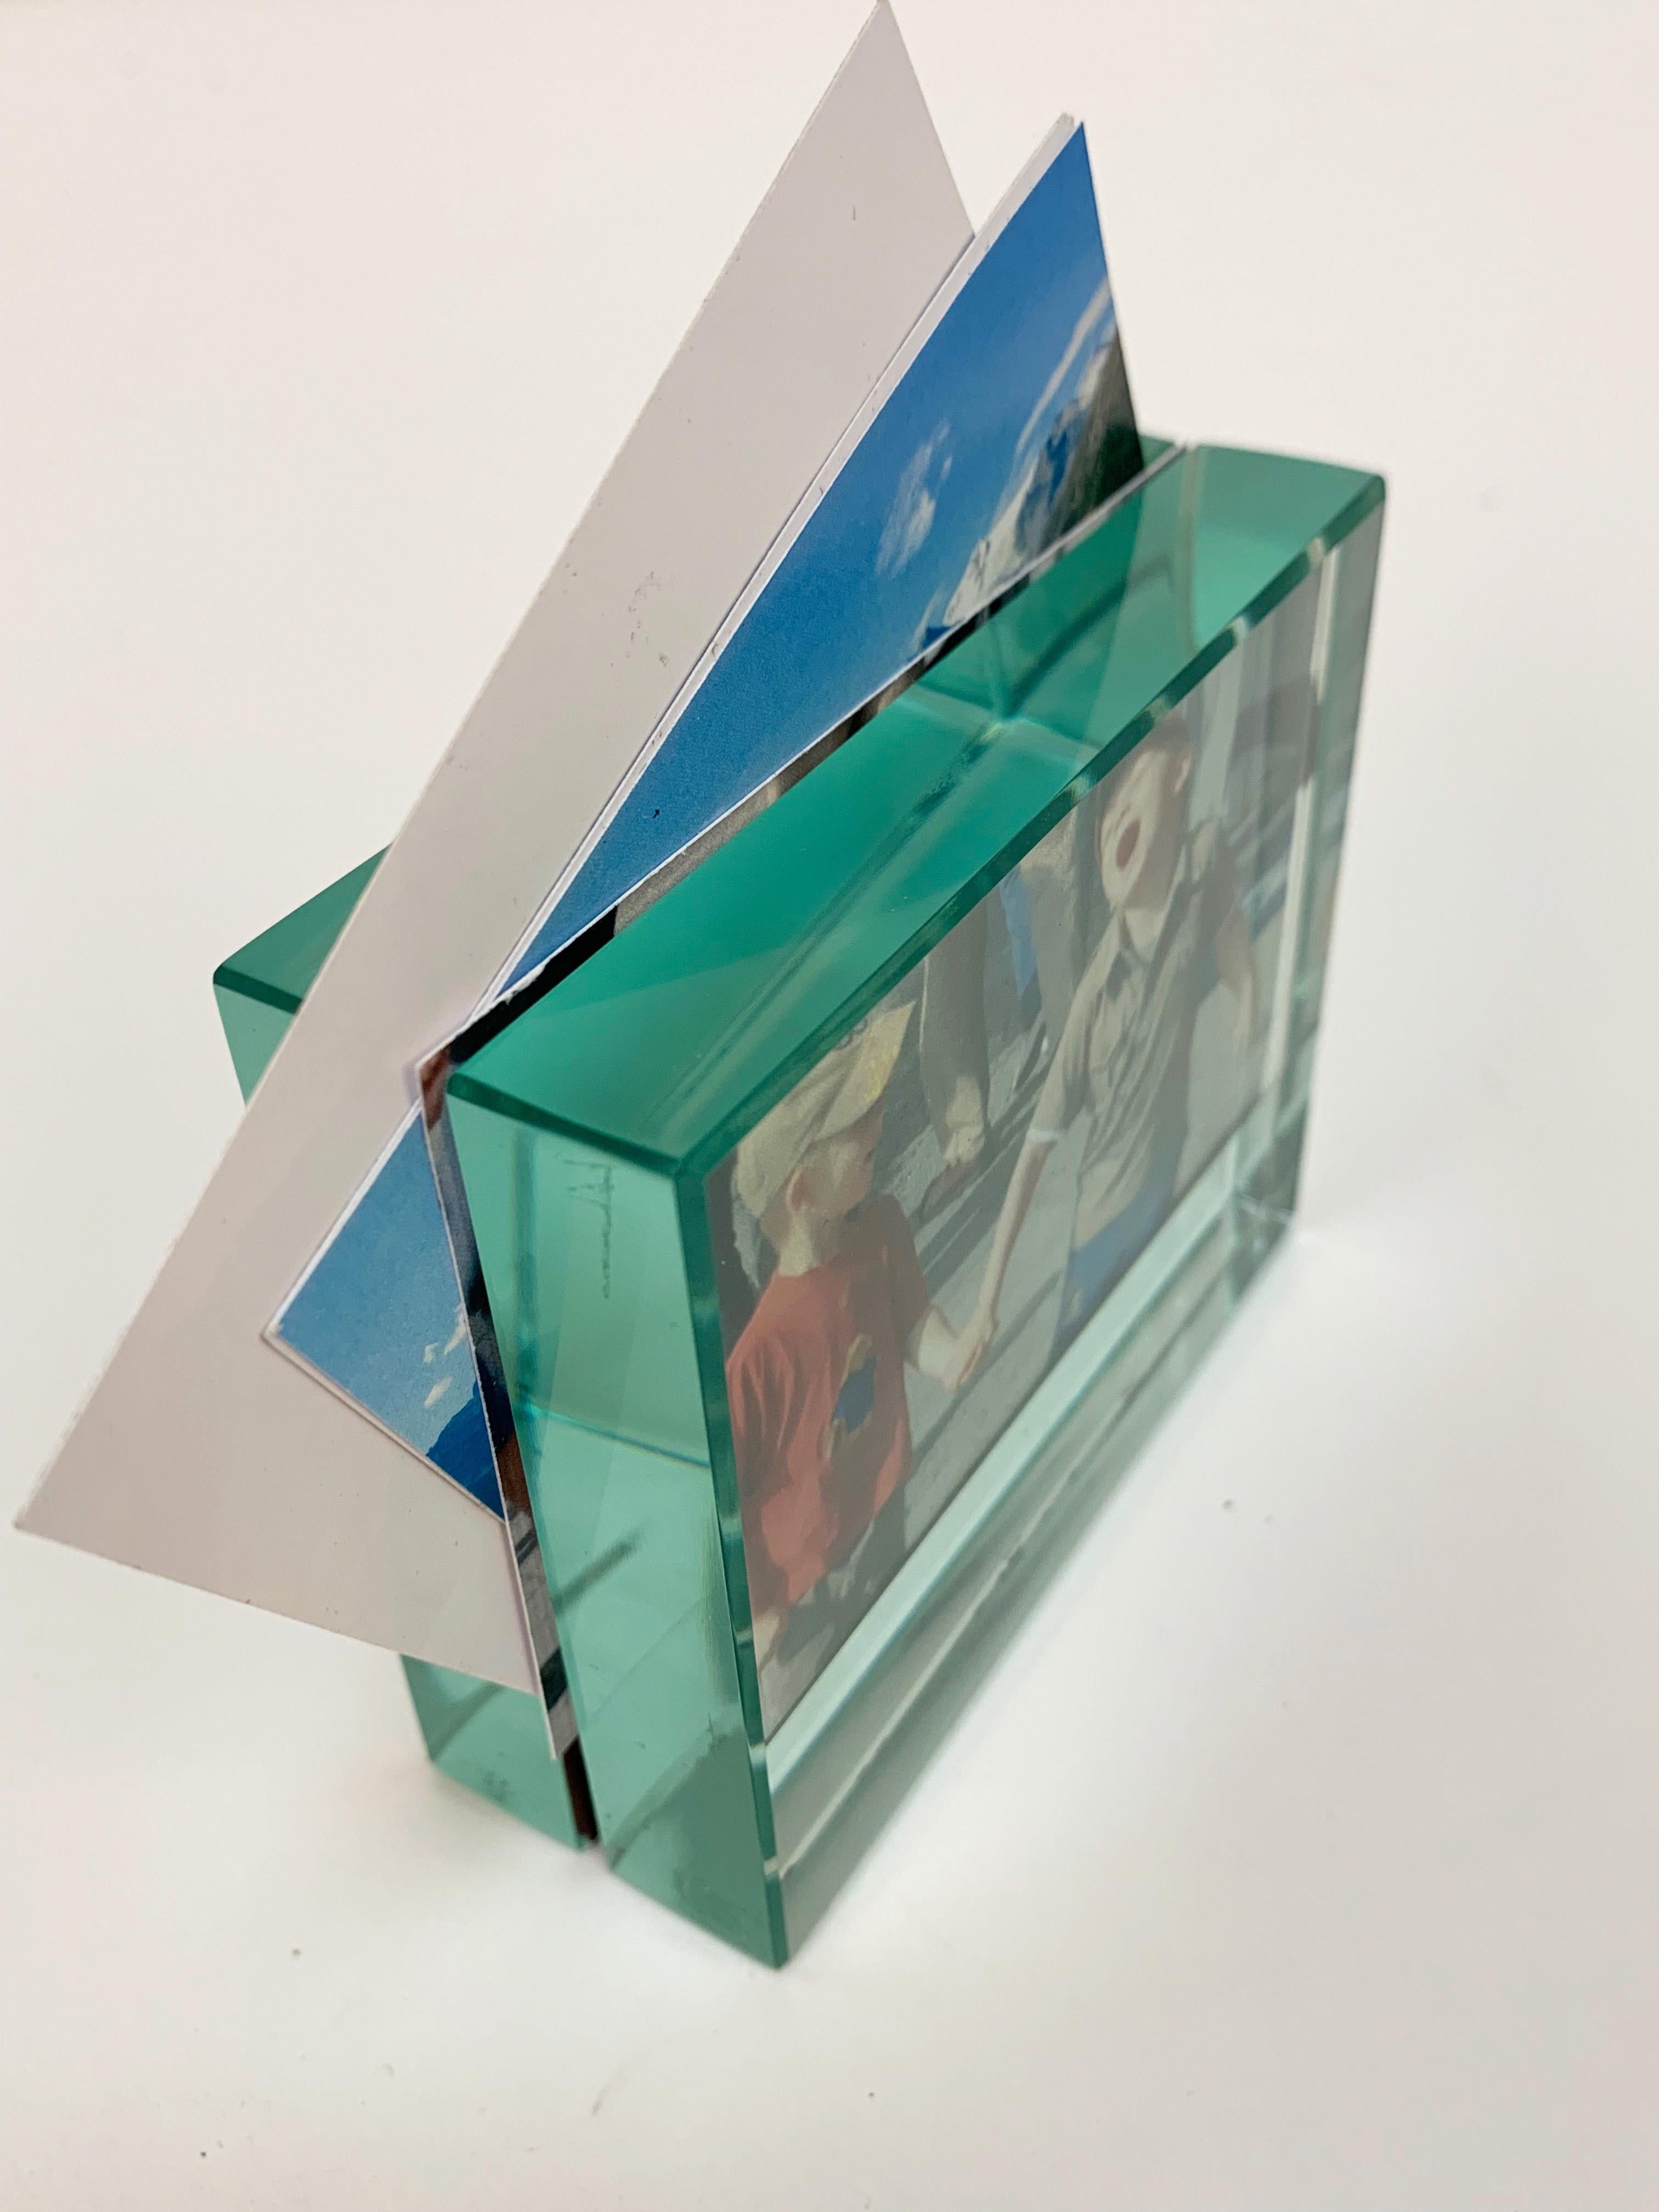 Fontana Arte Minimalist frame. Heavy beveled green glass with opening slot for one or two photos in the middle.
At the base the glass is mirrored,
circa 1980s.